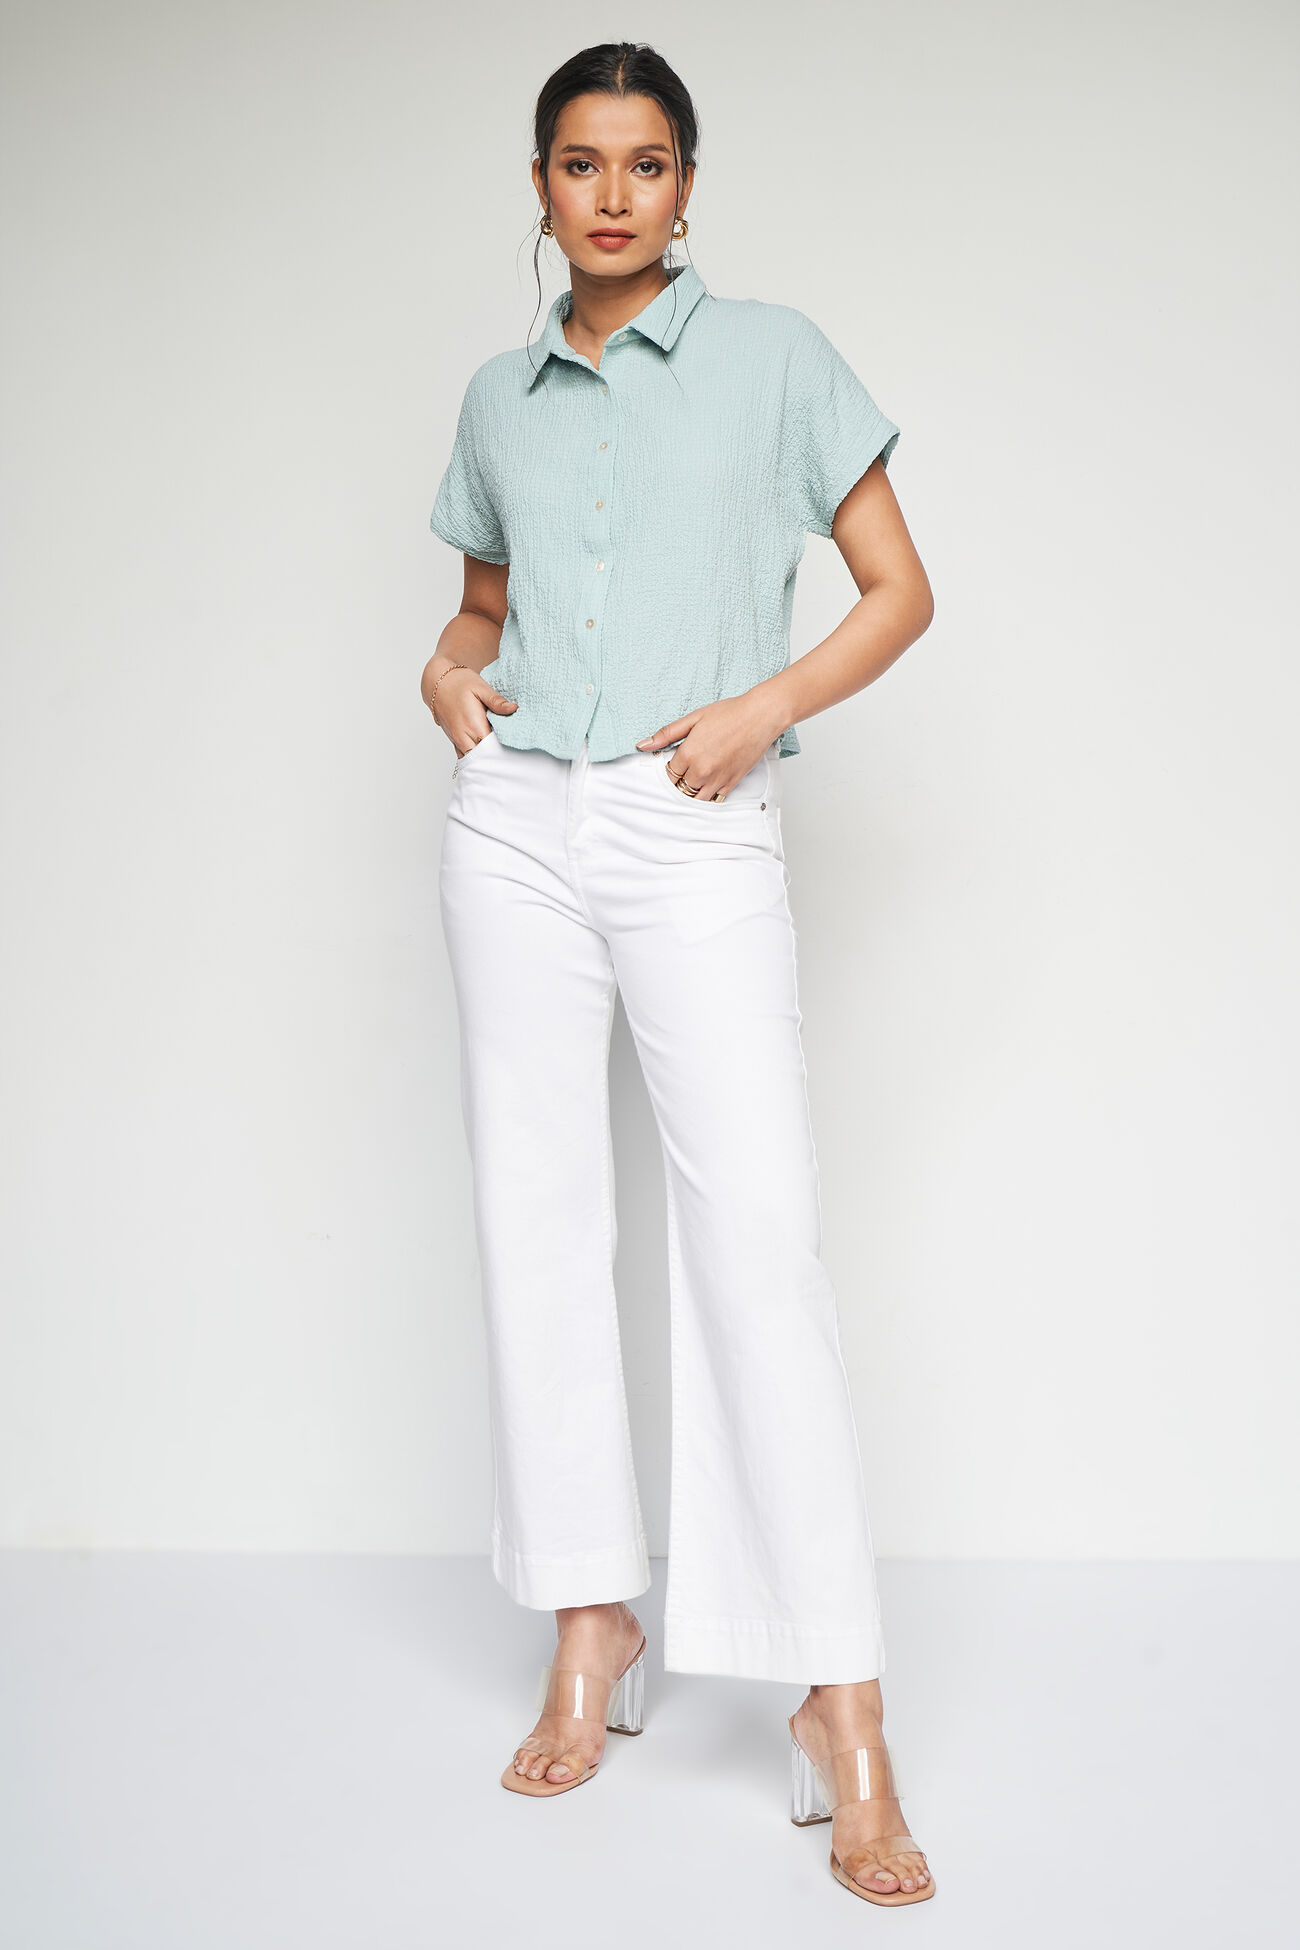 Everyday Essential Shirt, Mint, image 2